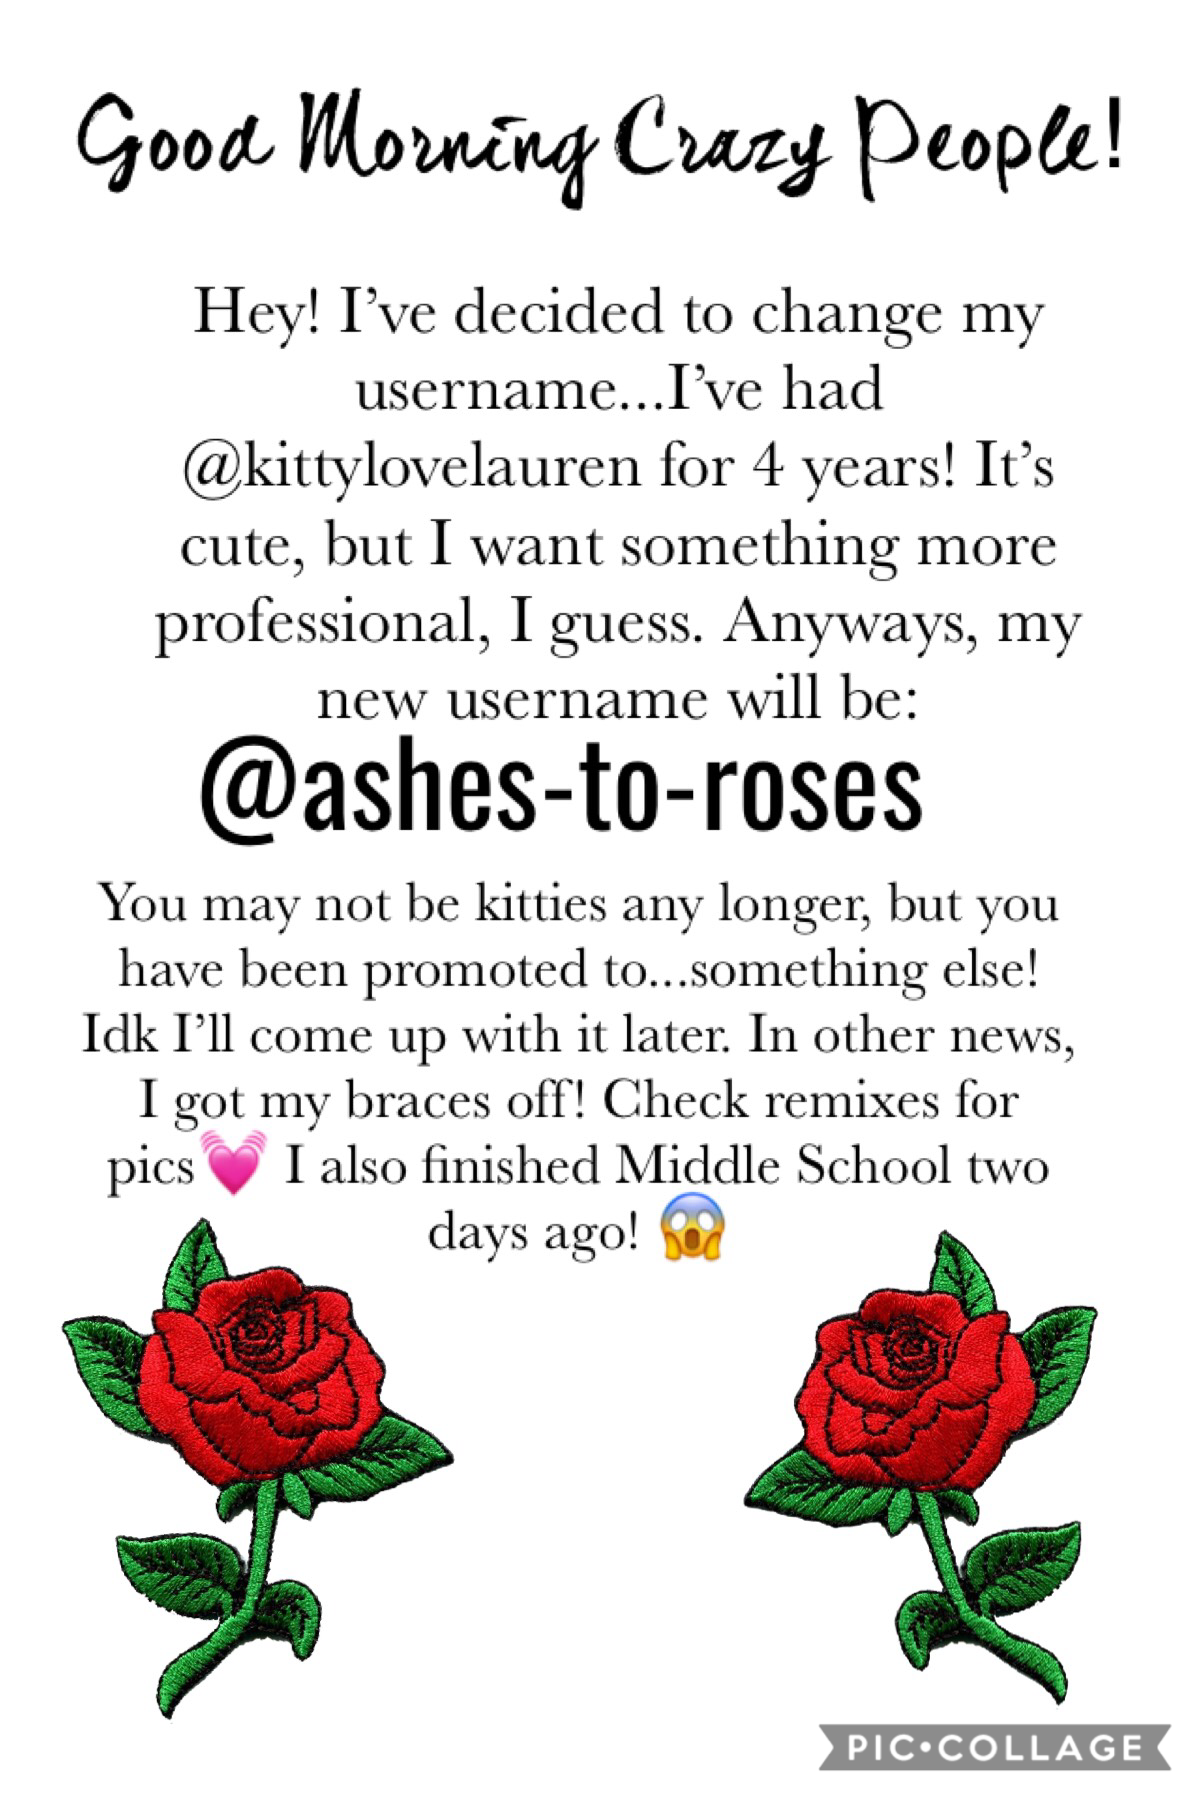 y o u    b e t t a    t a p
hey! @ashes-to-roses here! 💗 I love the sound of this...😂 check remixes! I love you guys! 💗 